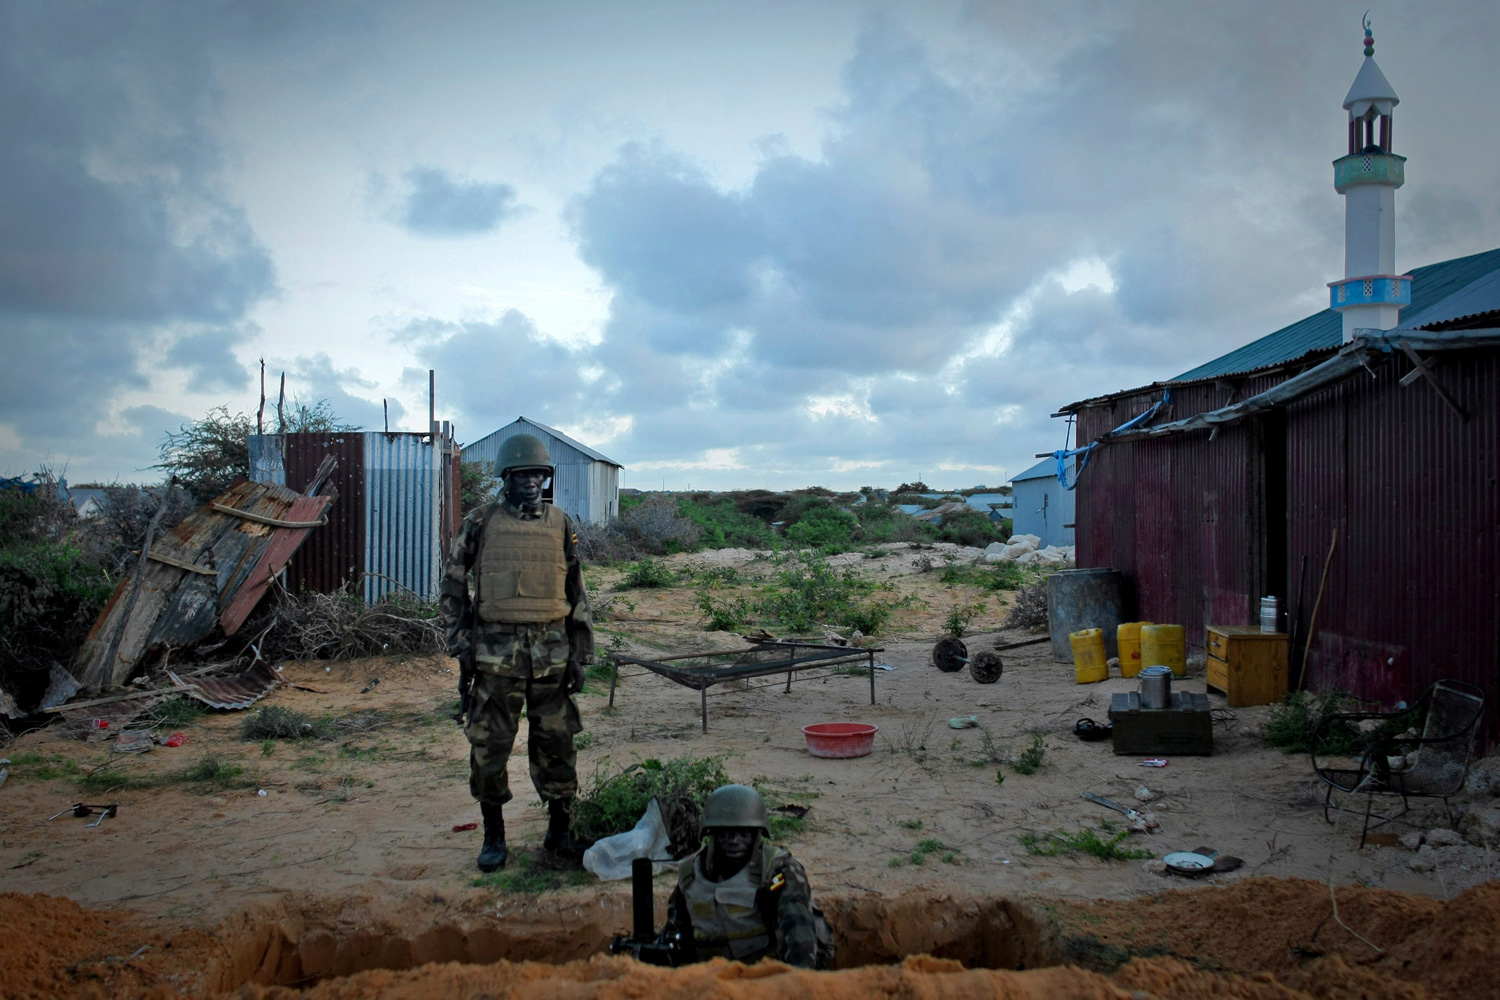 April 29, 2012. Ugandan soldiers serving with the African Union Mission in Somalia occupy a mortar position along the frontline of a defensive box position straddling the main road on the northern edge of Maslah Town, northwest of the Somali capital of Mogadishu.